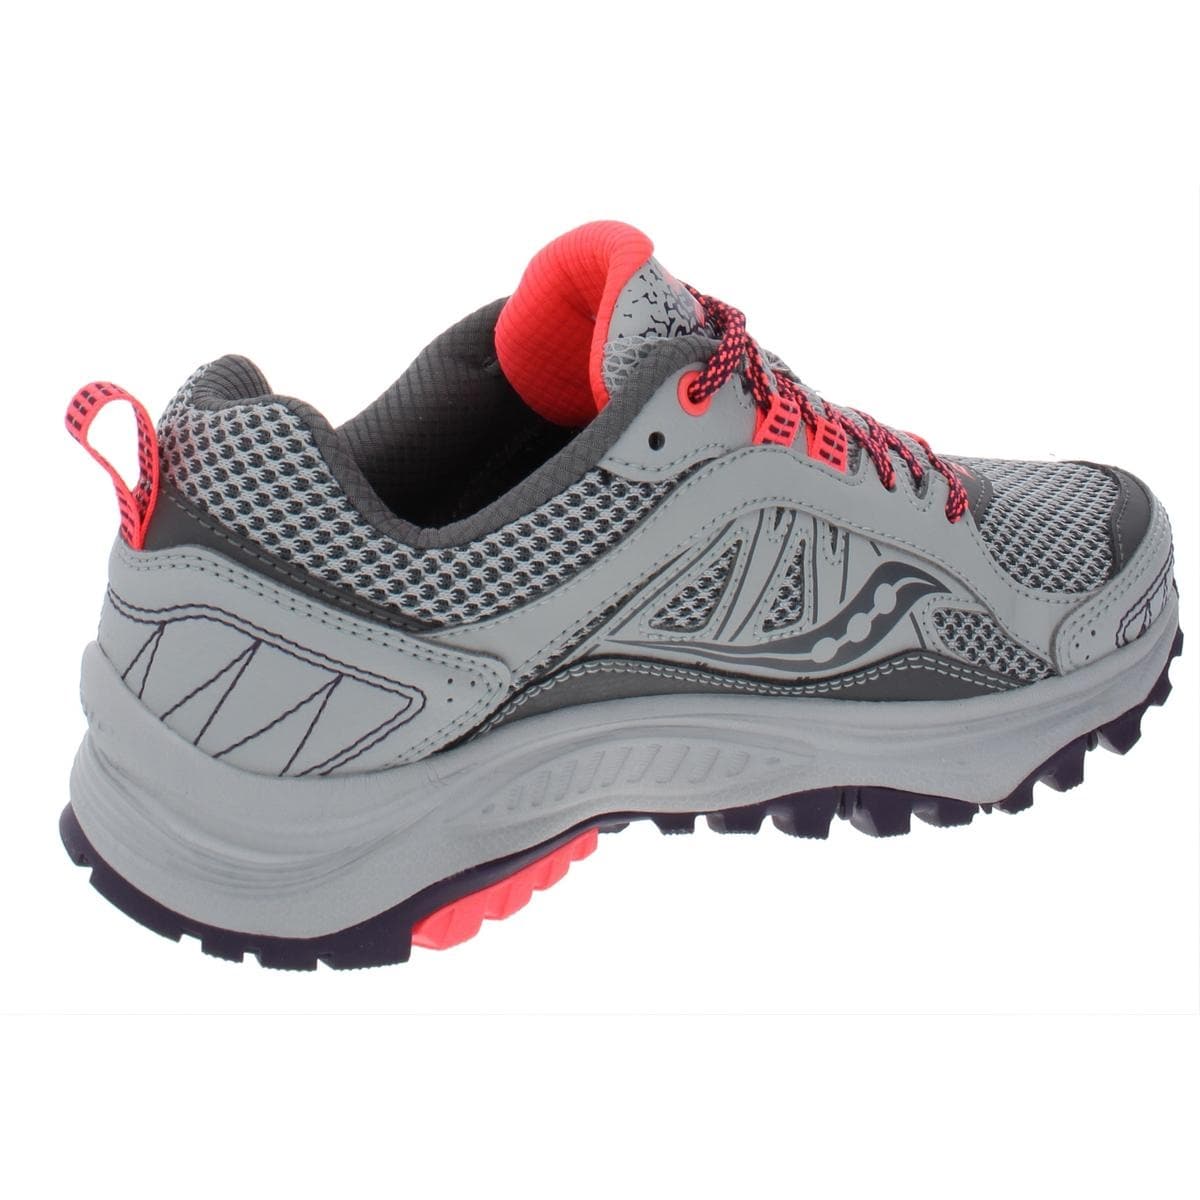 saucony men's excursion tr9 trail running shoes